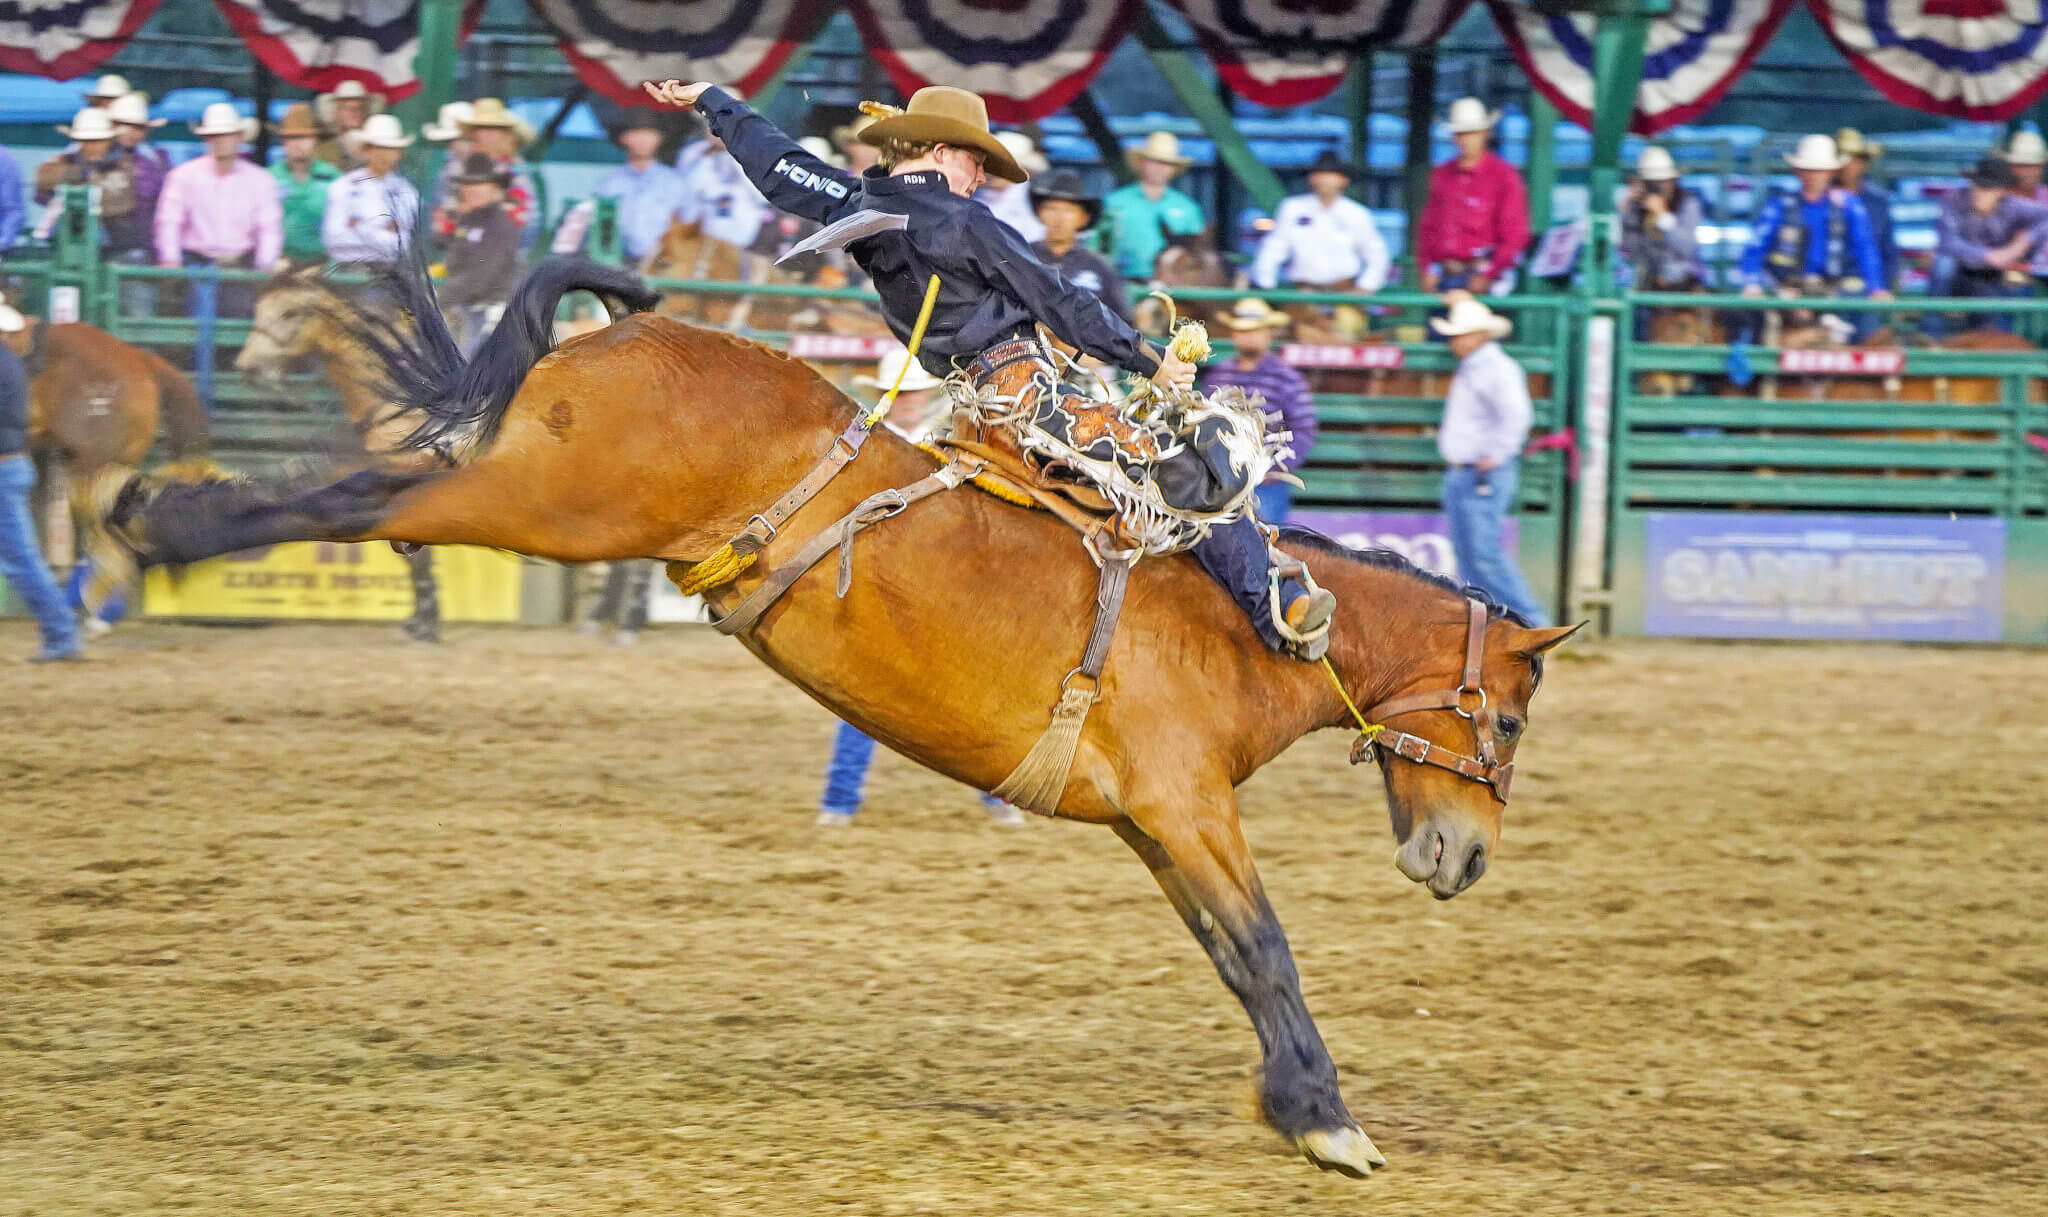 Reno Rodeo Wildest, Richest Rodeo in the West